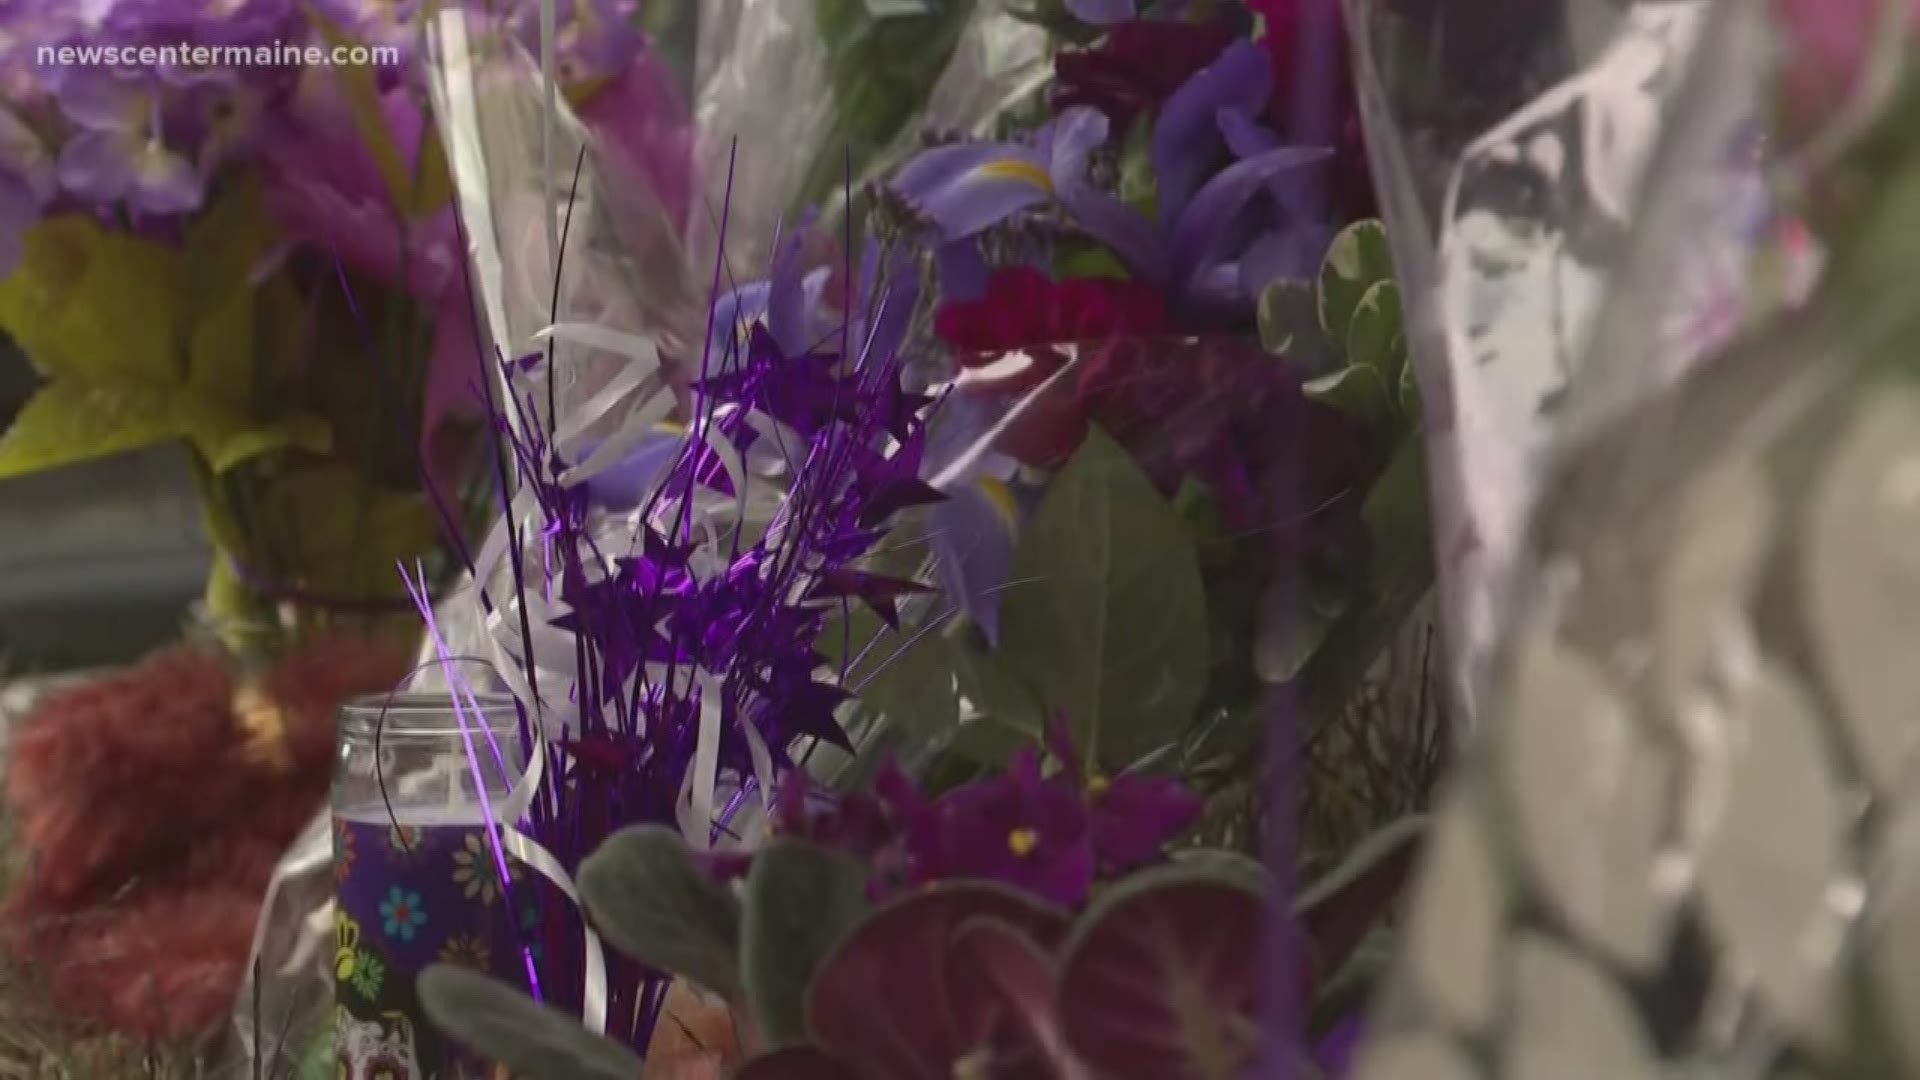 Family and friends held a vigil outside Melissa Sousa's home Friday morning, many bringing purple flowers to raise awareness about domestic violence.